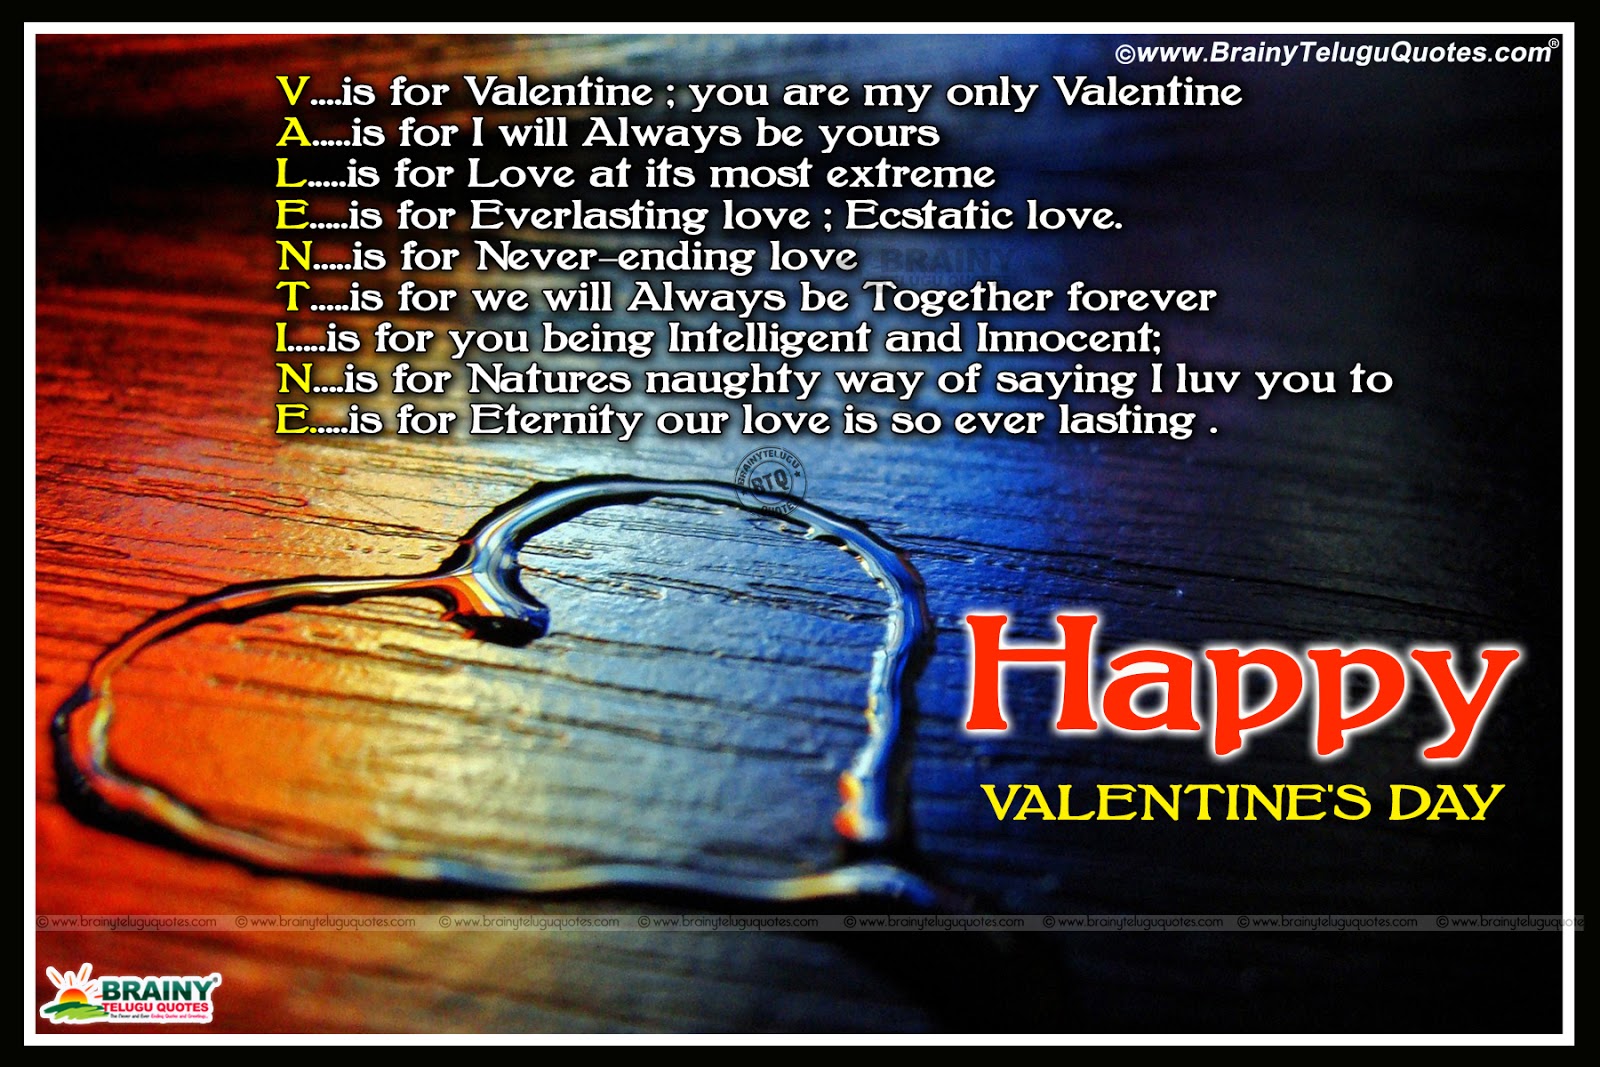 Meaning of Valentine in EnglishLatest 2017 Advanced Valentine's Day